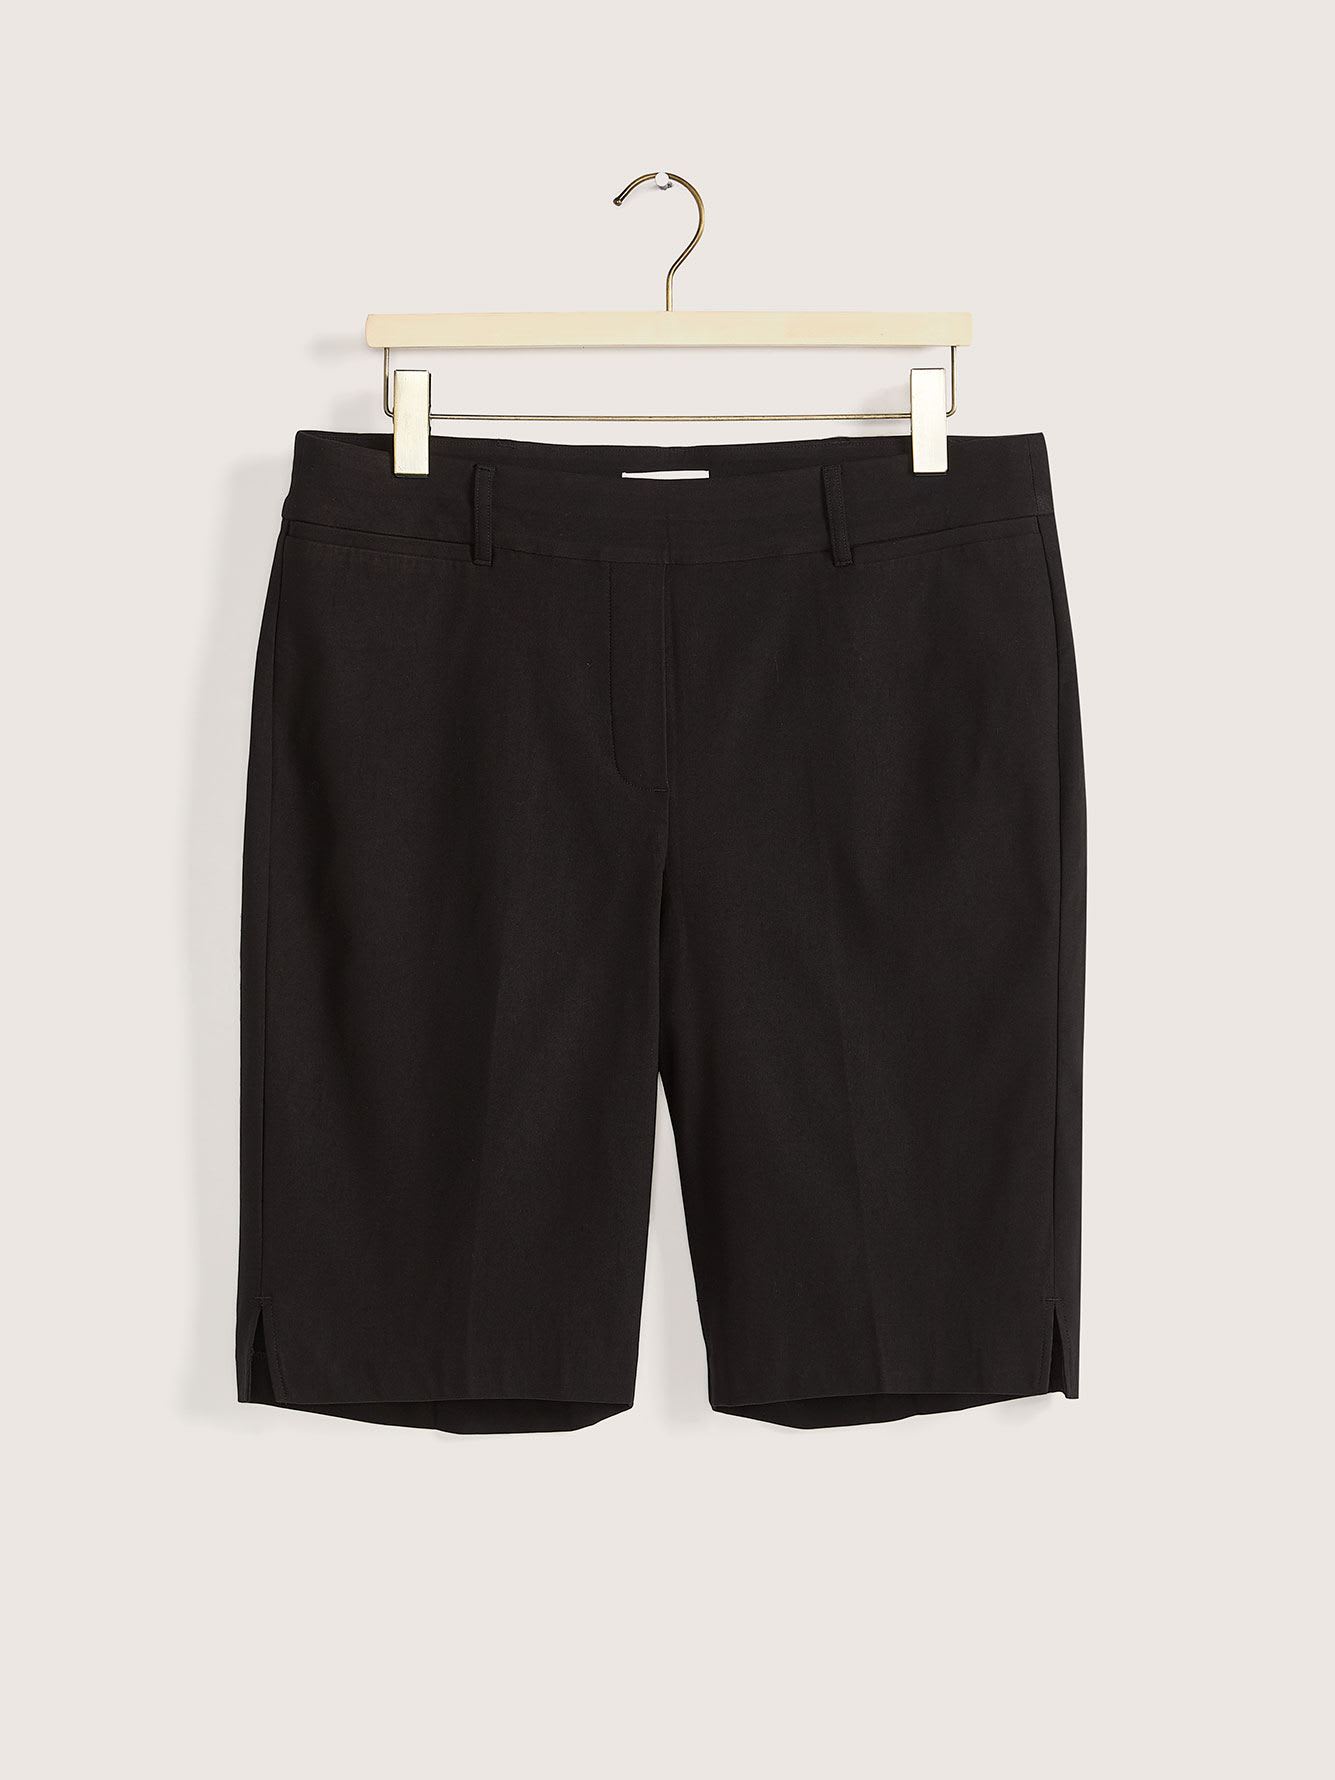 Responsible, Savvy Fit Bermuda Shorts - In Every Story | Penningtons